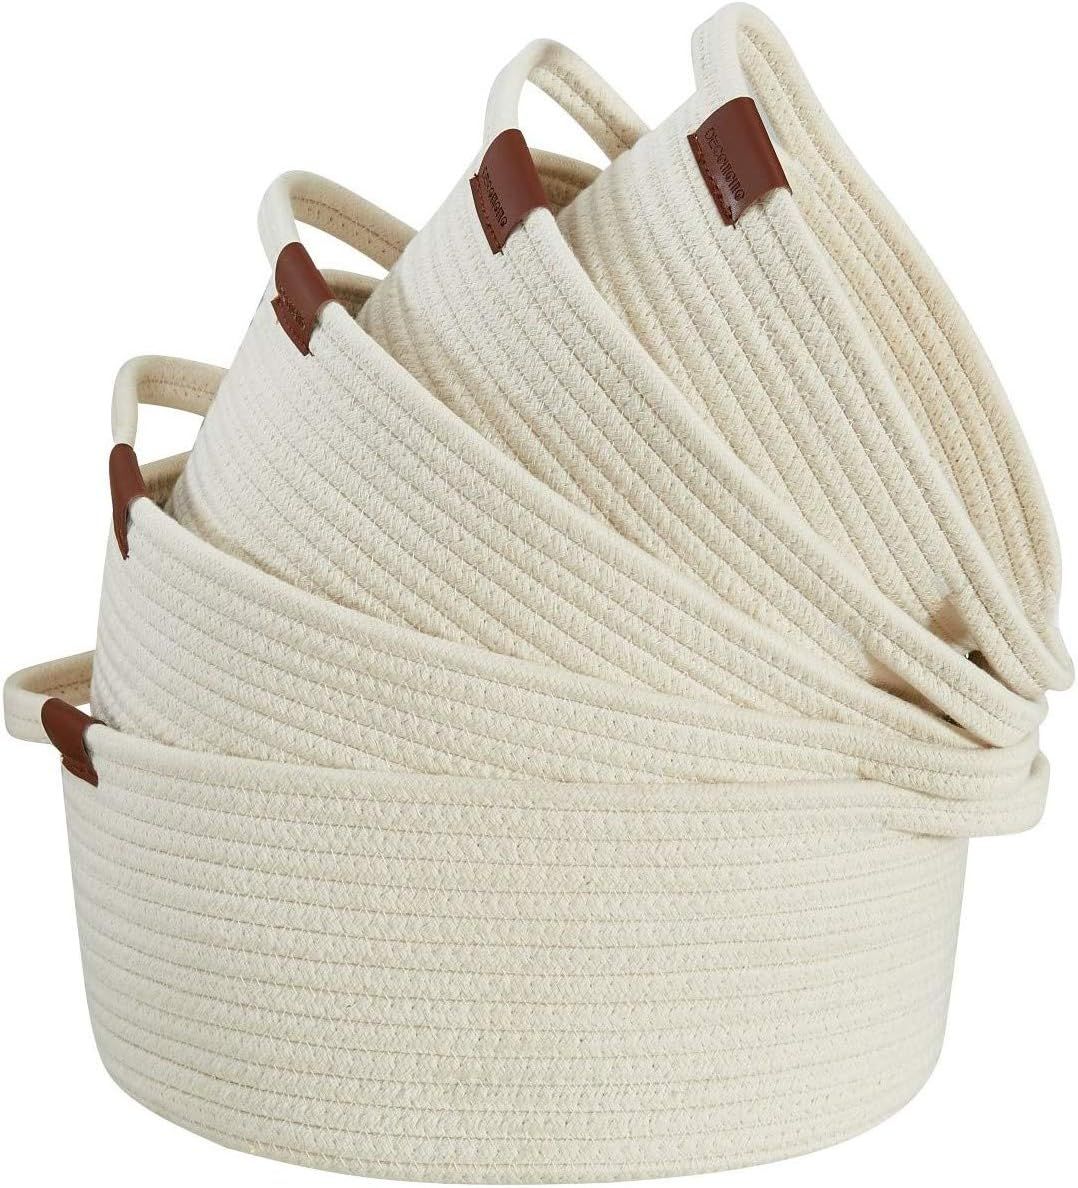 DECOMOMO Cotton Rope Baskets Woven Foldable Storage Bin with Handles | Great for Nursery/Toys/Sta... | Amazon (US)